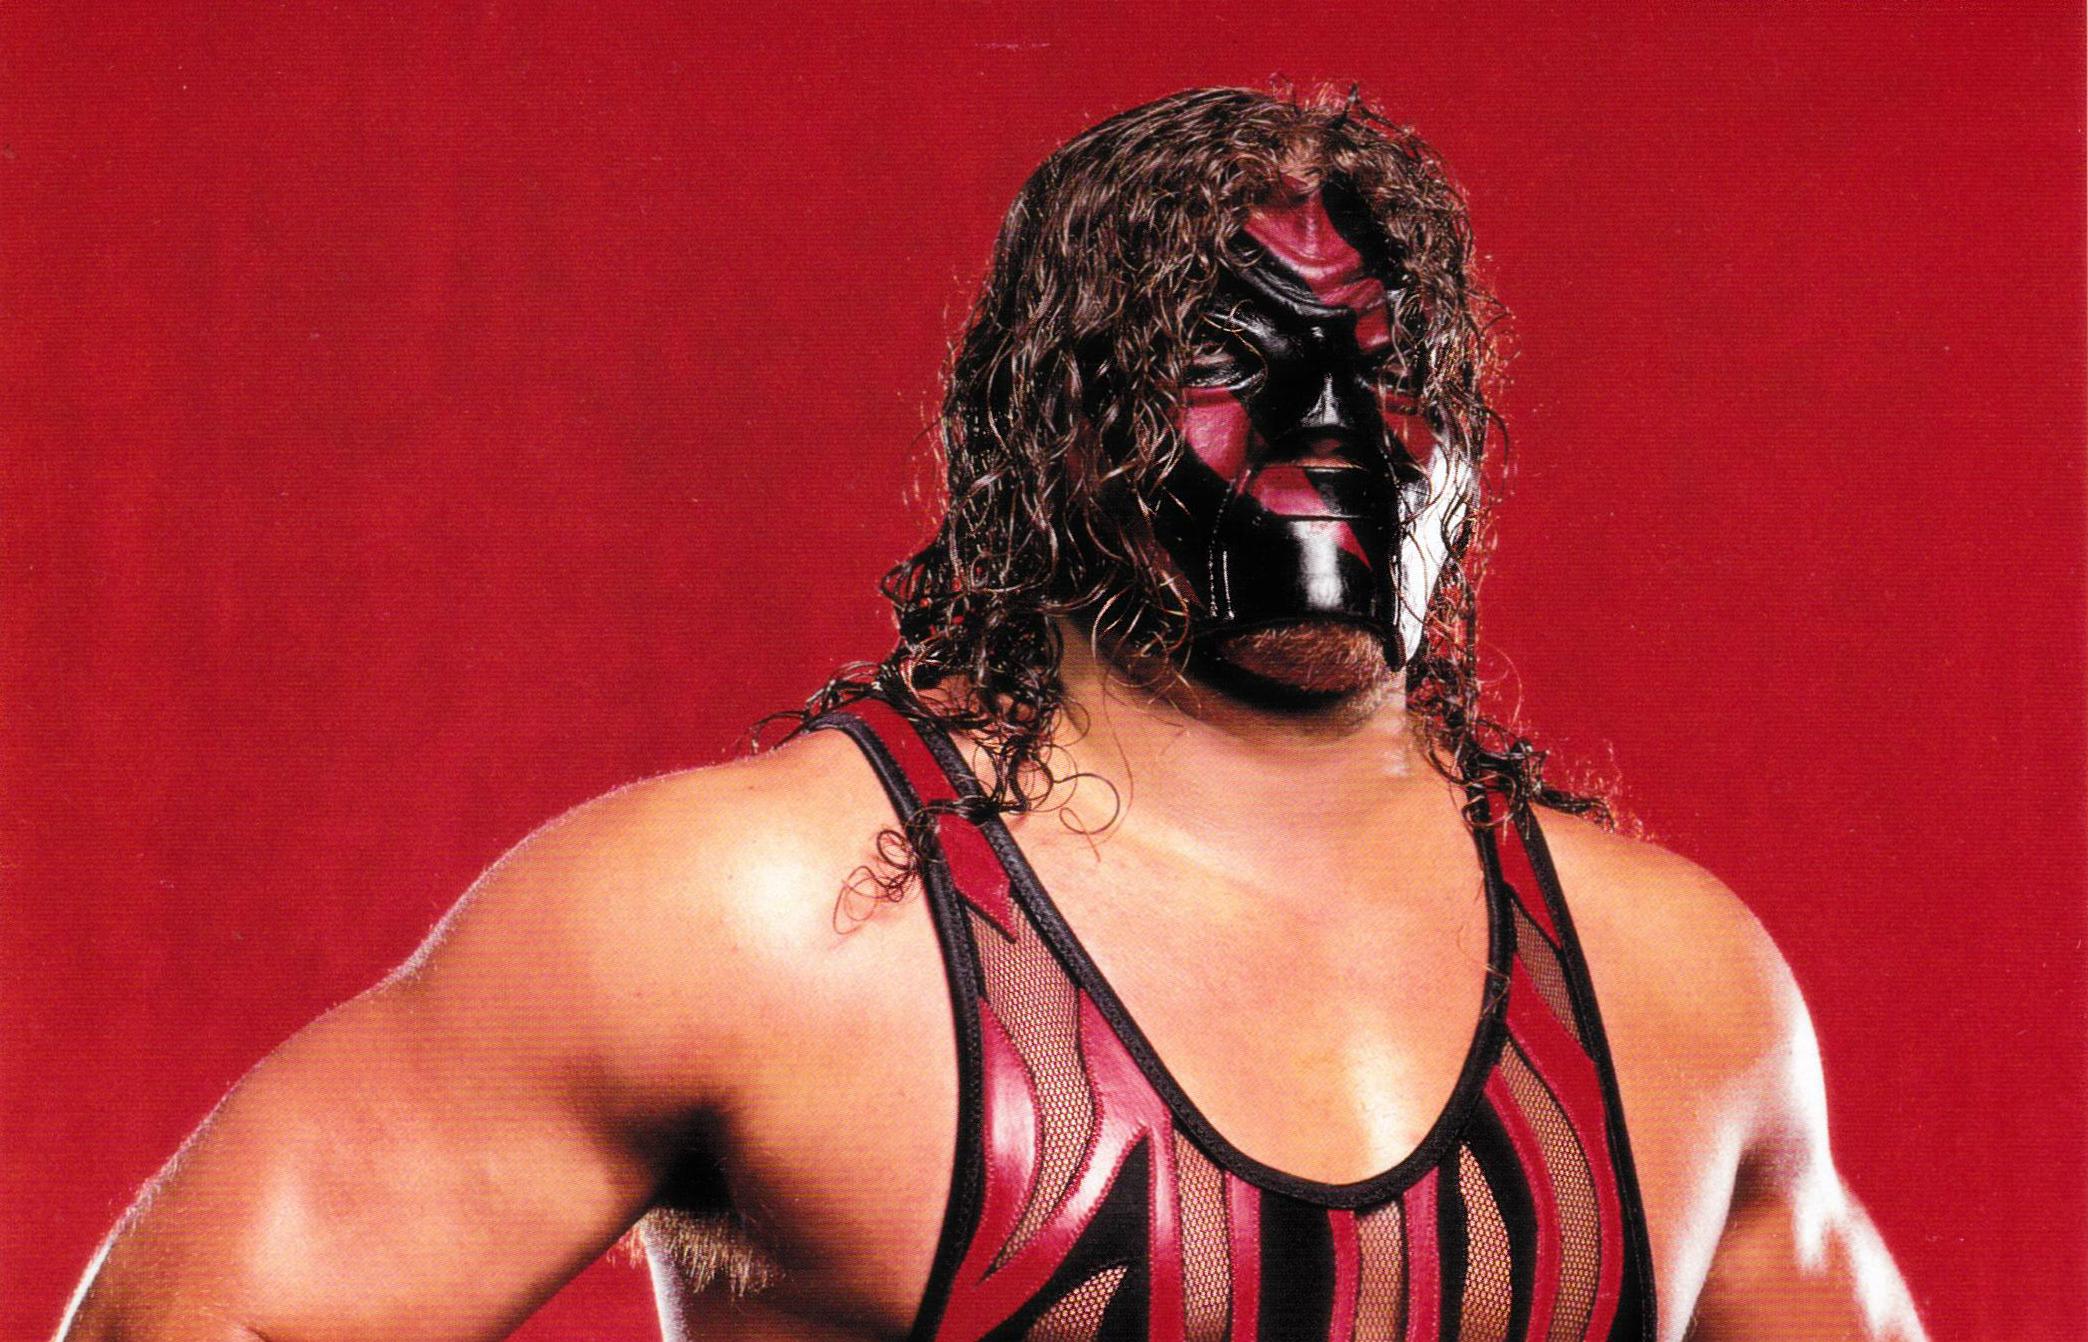 WWE wrestler Kane elected mayor of Knox County, Tennessee | The ...